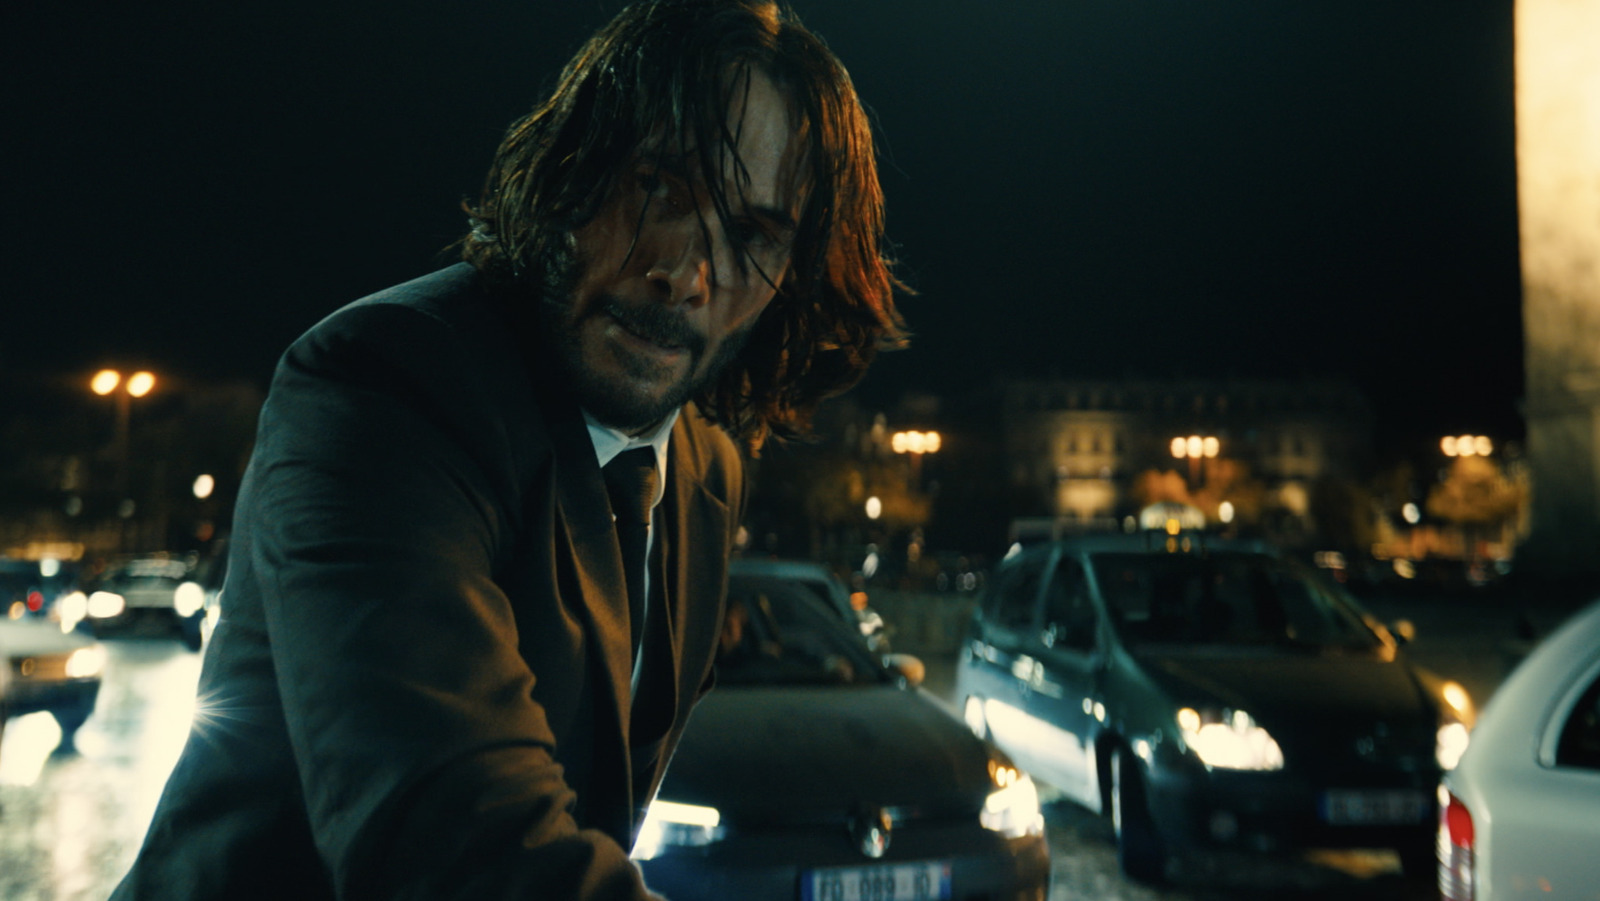 John Wick 4 Stunt Coordinators Explain How To Get Hit By A Car ... Safely [Exclusive] 